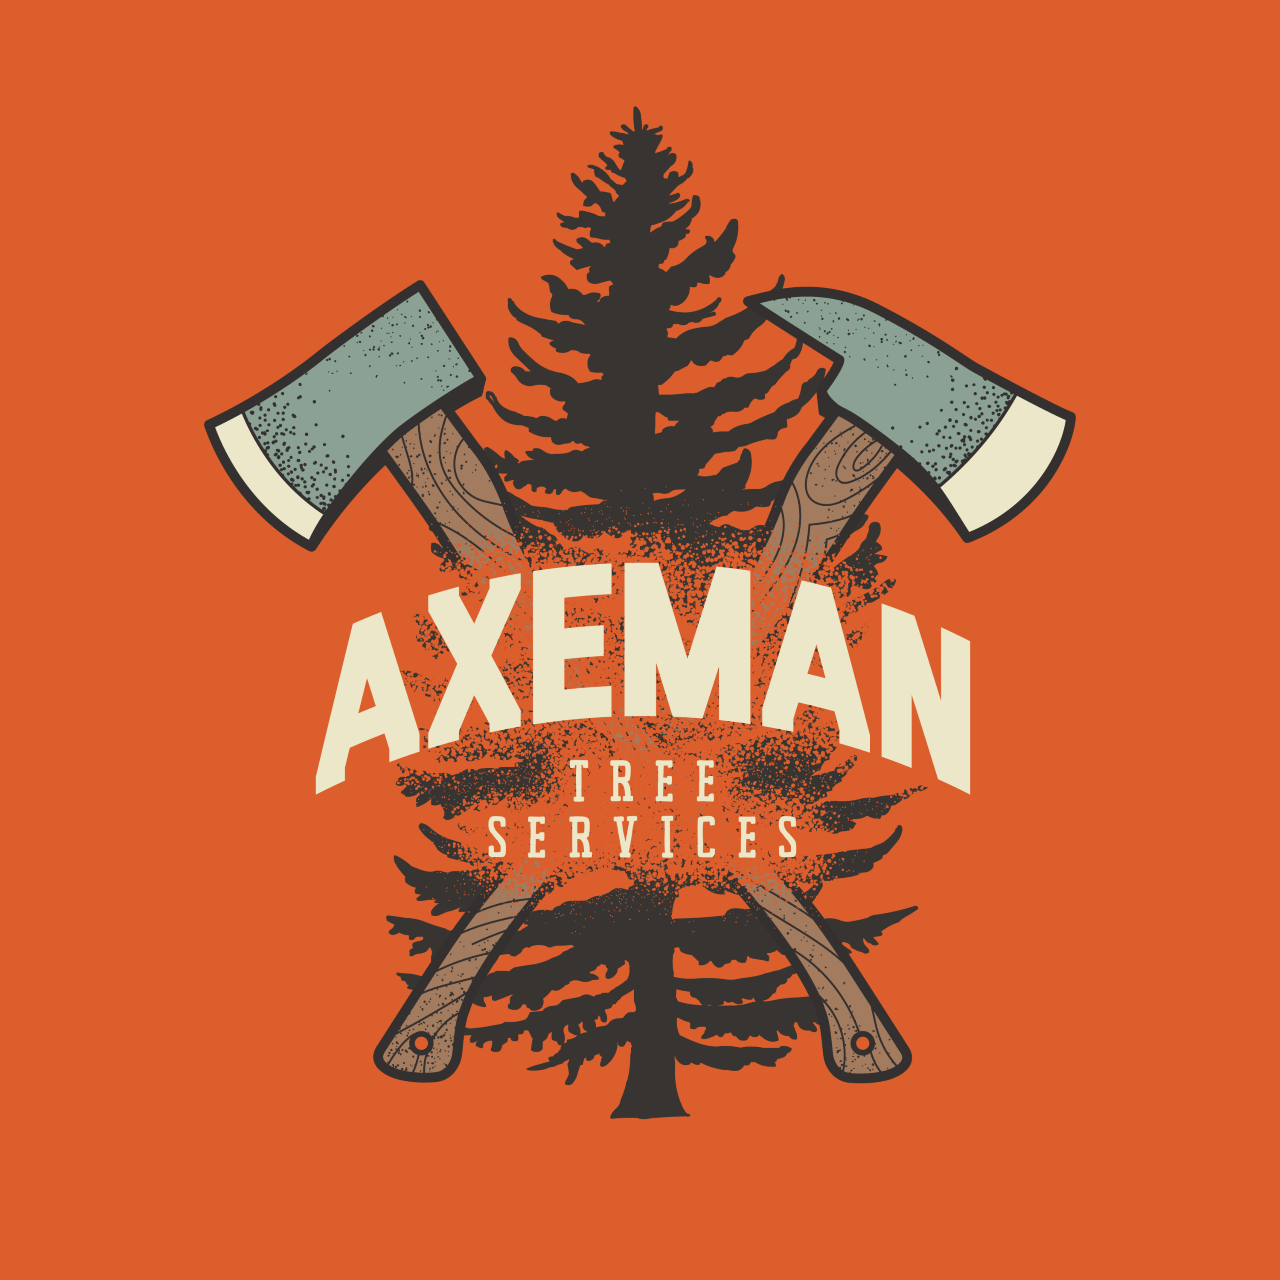 Axeman Tree Services